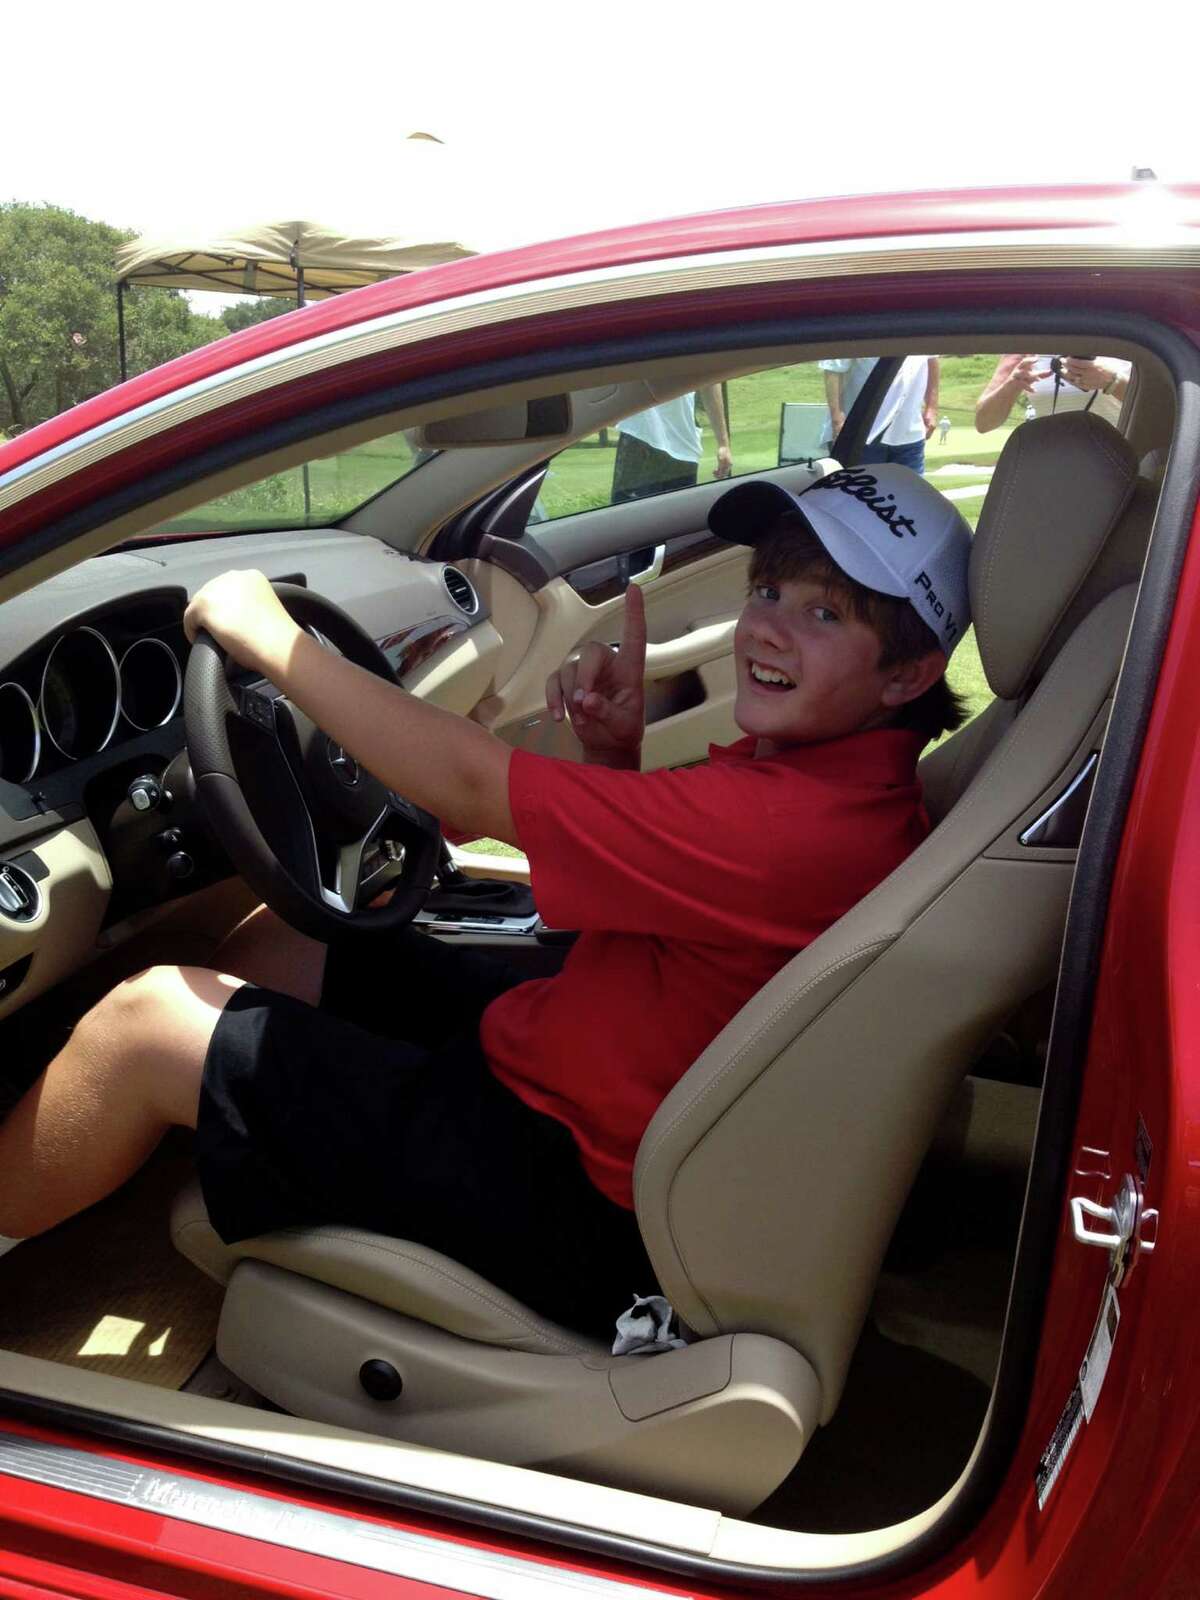 Thirteen-year-old Dalton Sisson's weekend included a hole-in-one at a charity tournament in Kerrville.